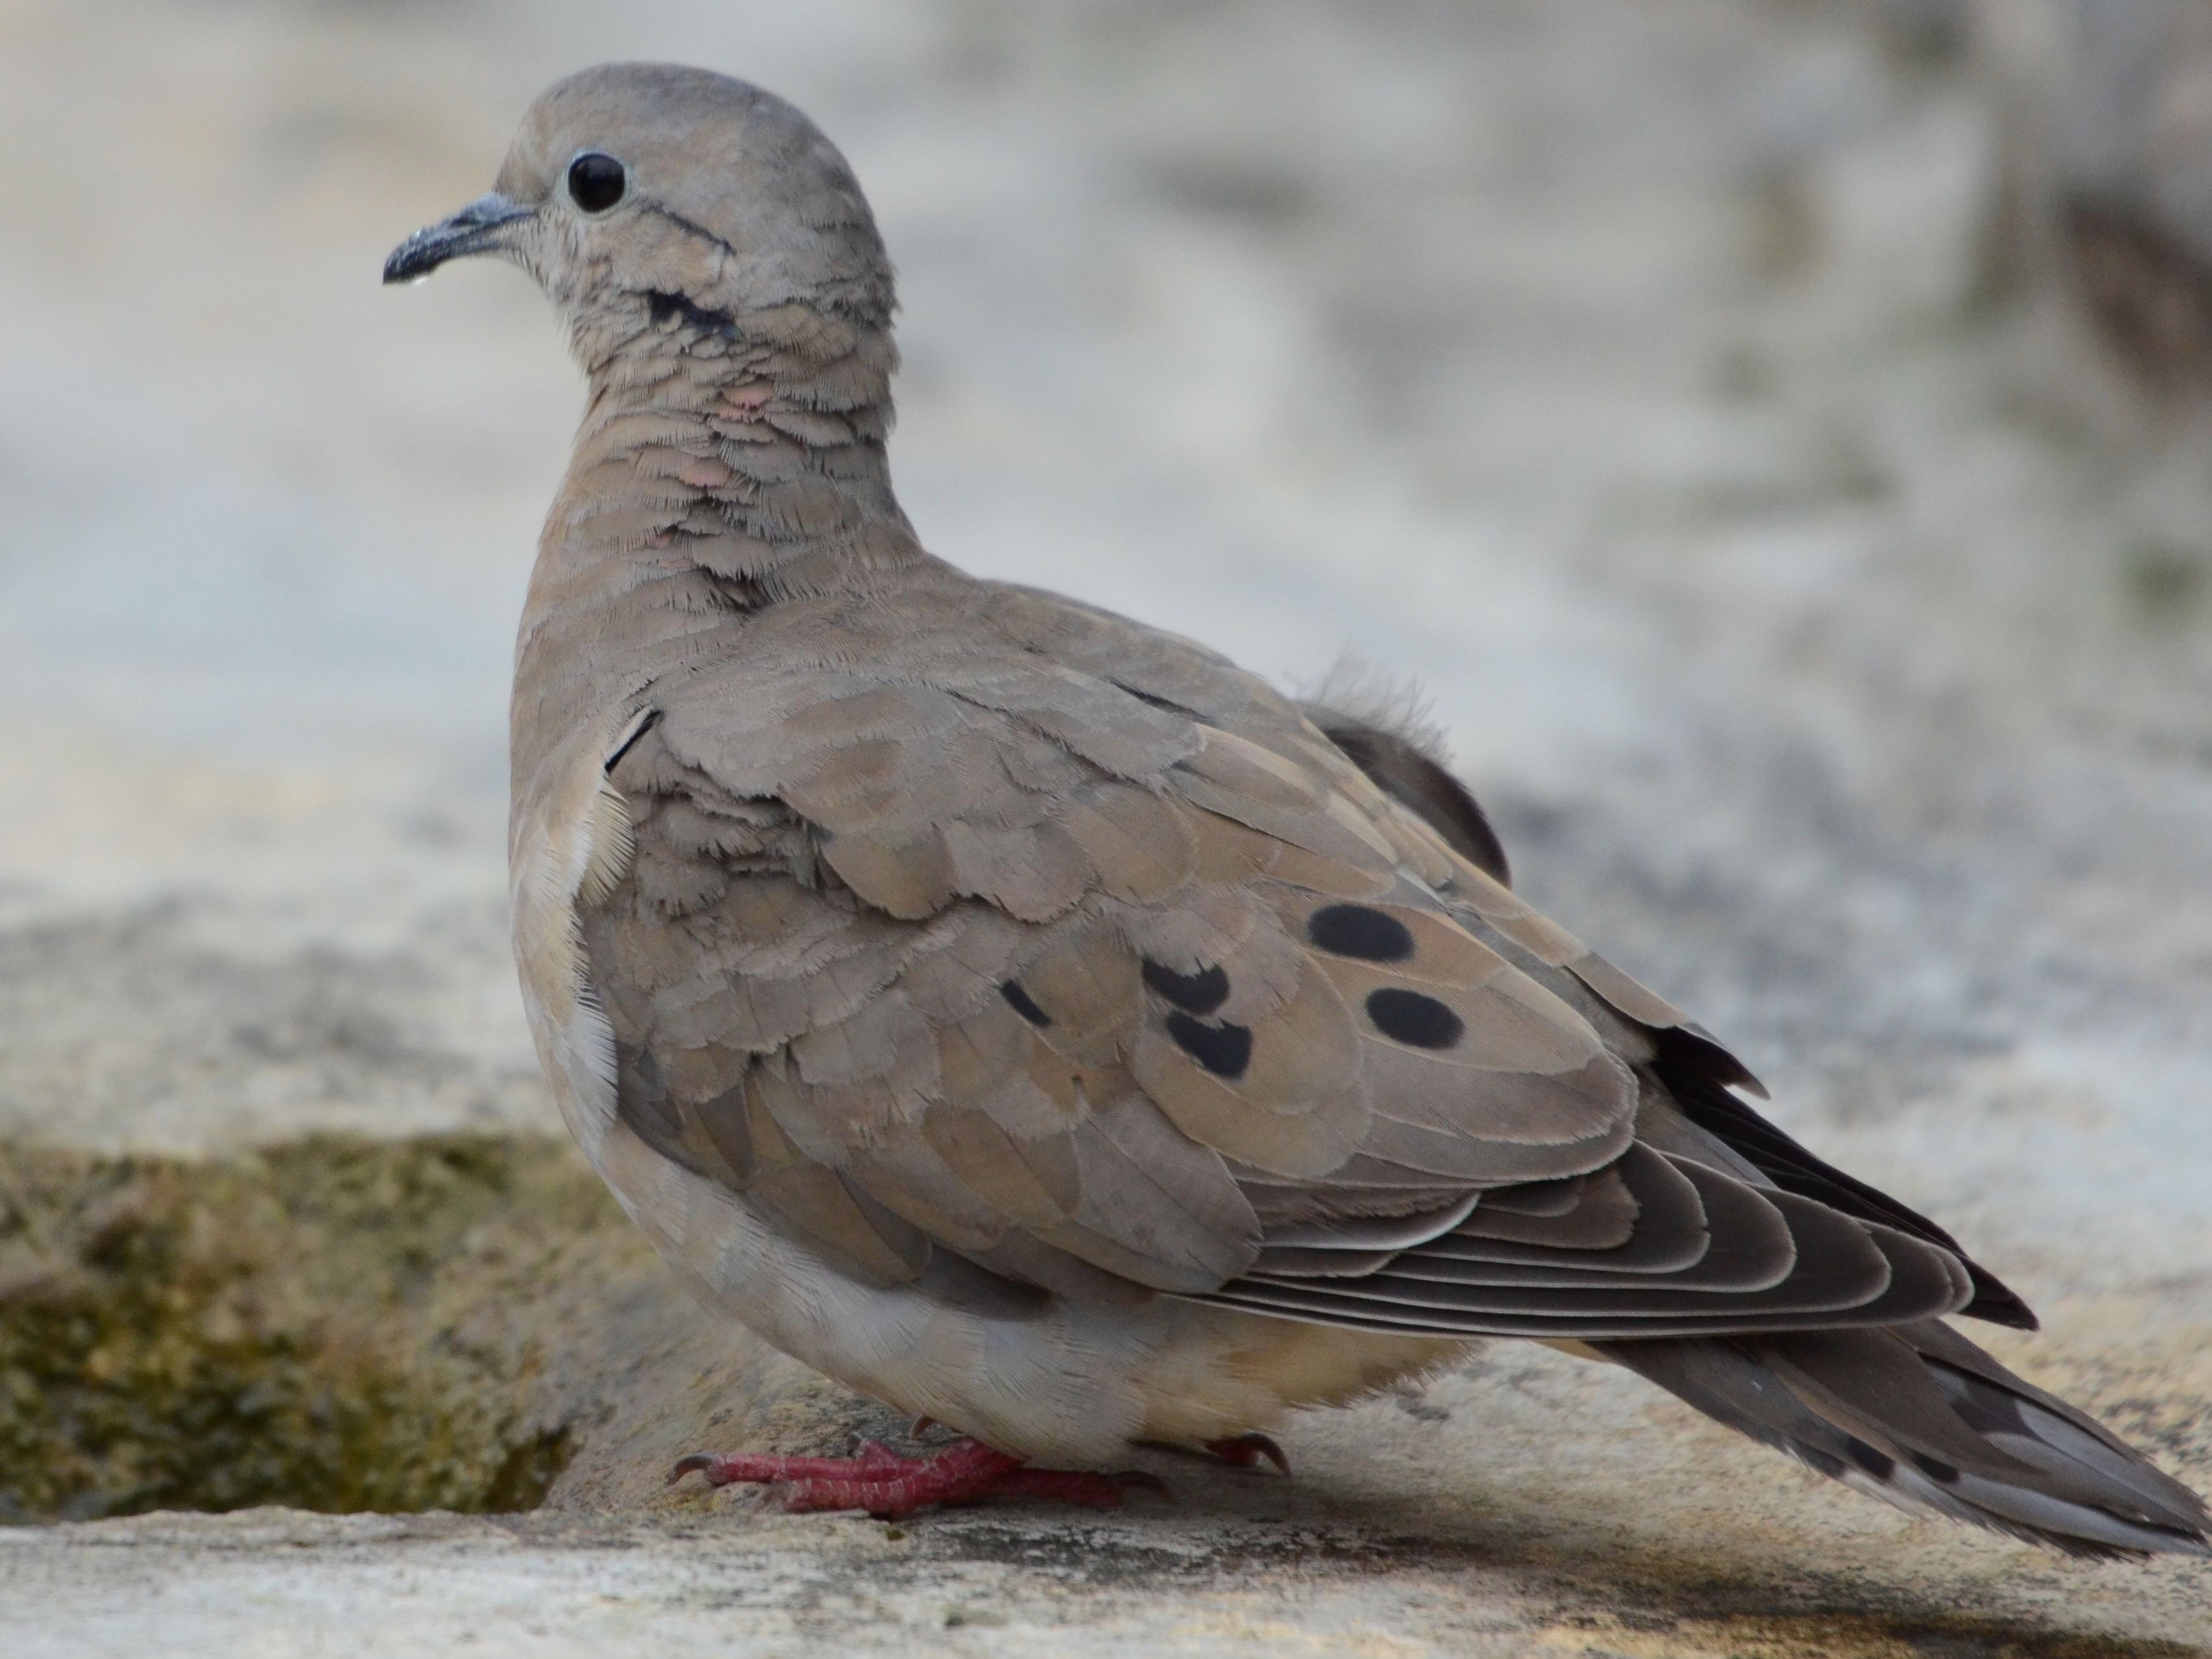 Click picture to see more Eared Doves.